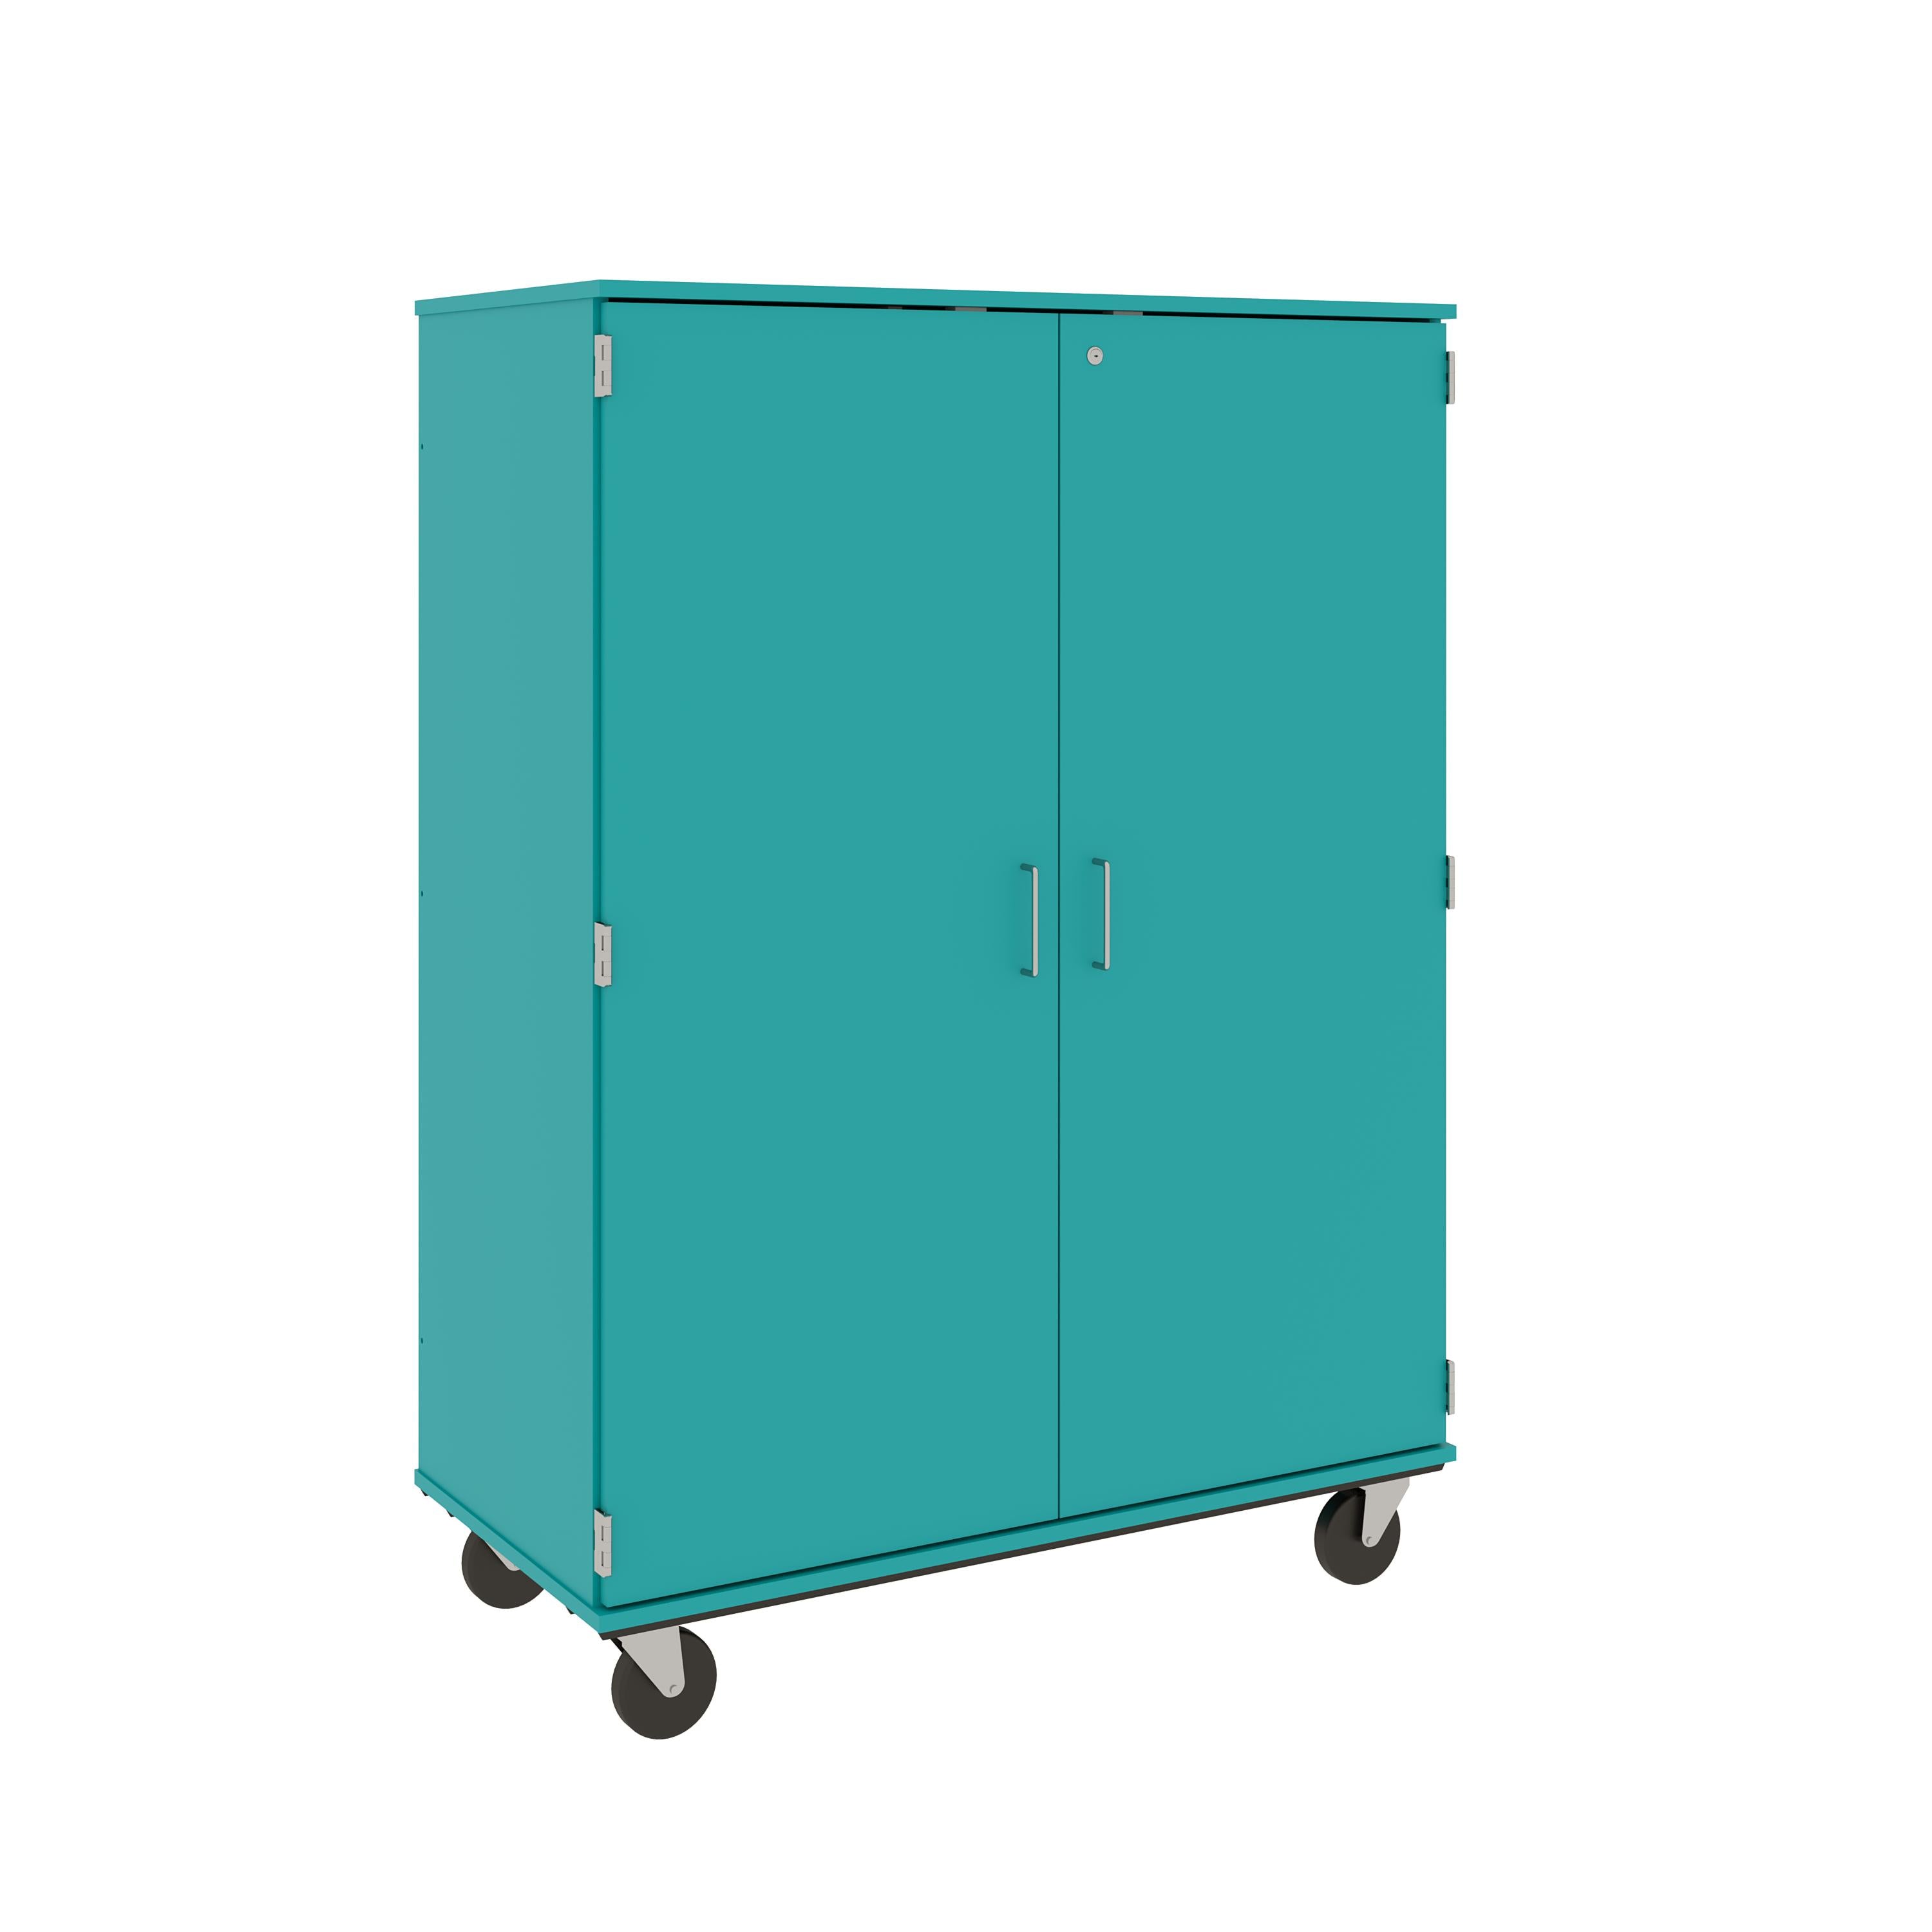 67" Tall Assembled Mobile 4 Shelves Storage Cabinet with 12 Trays - 80599 F67